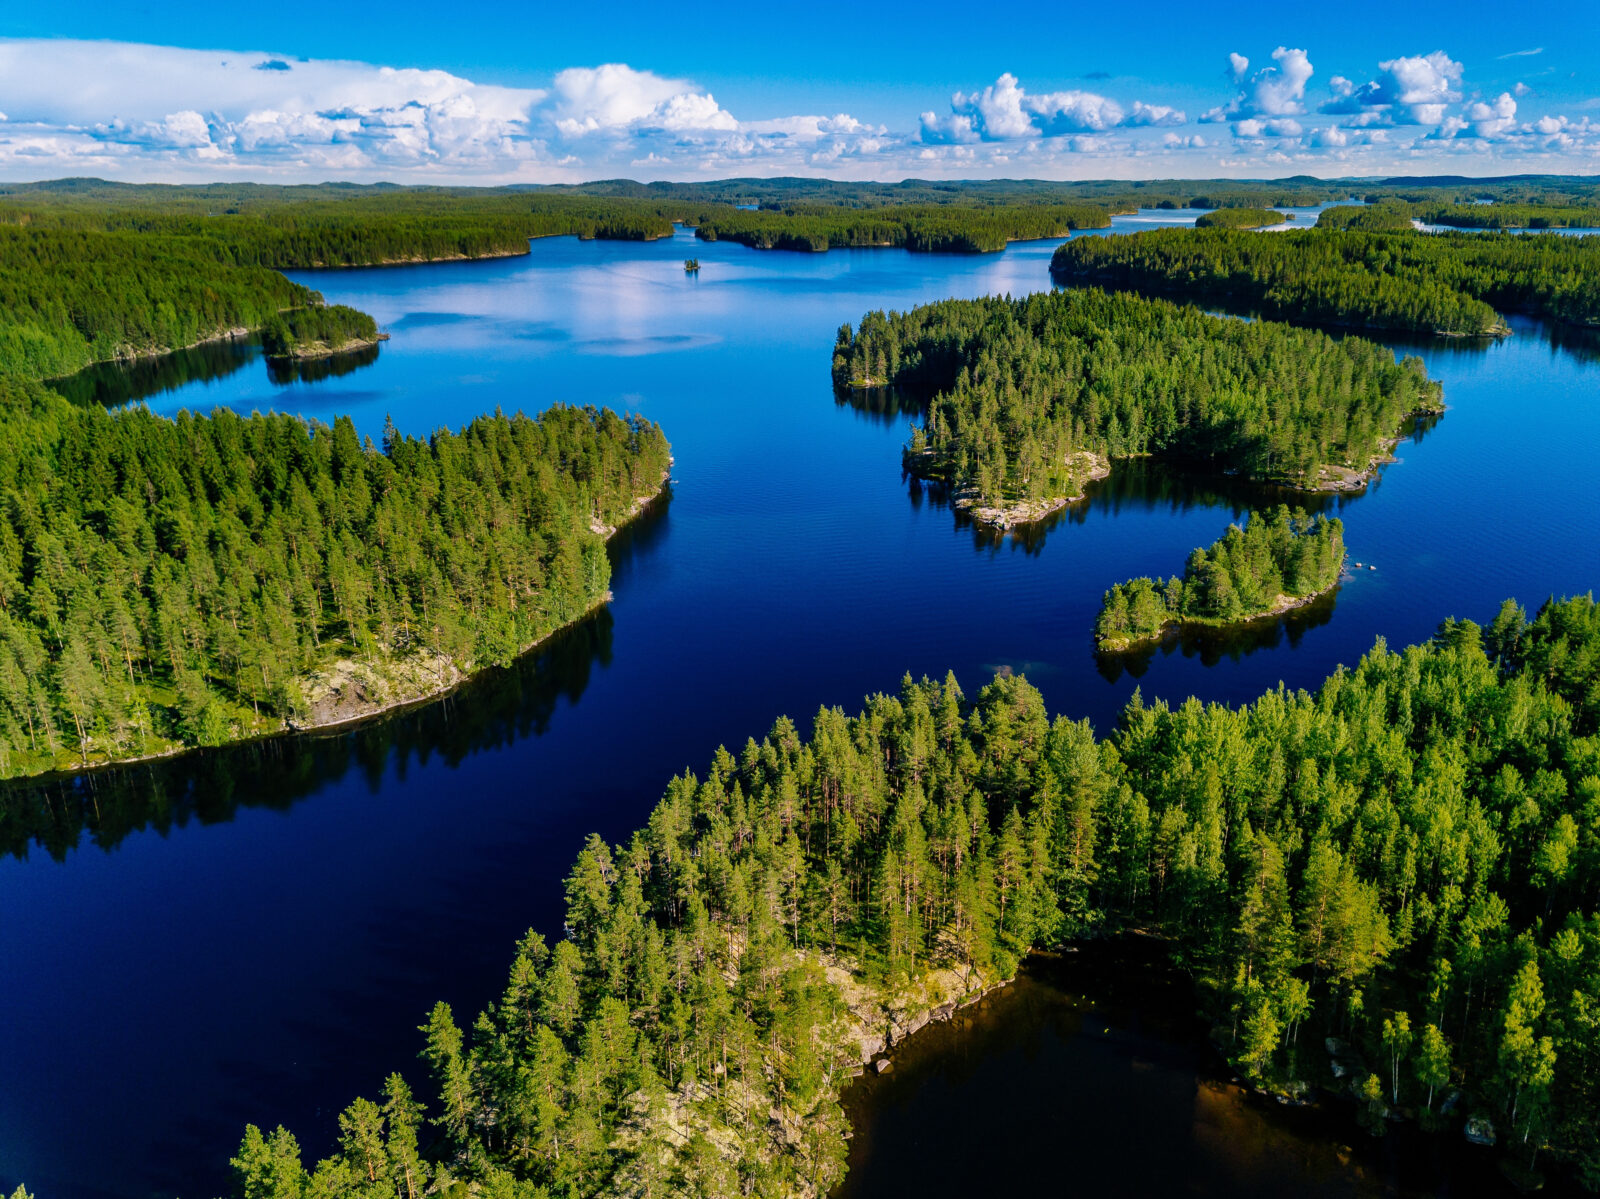 An image of a lake filled with tree-covered islands